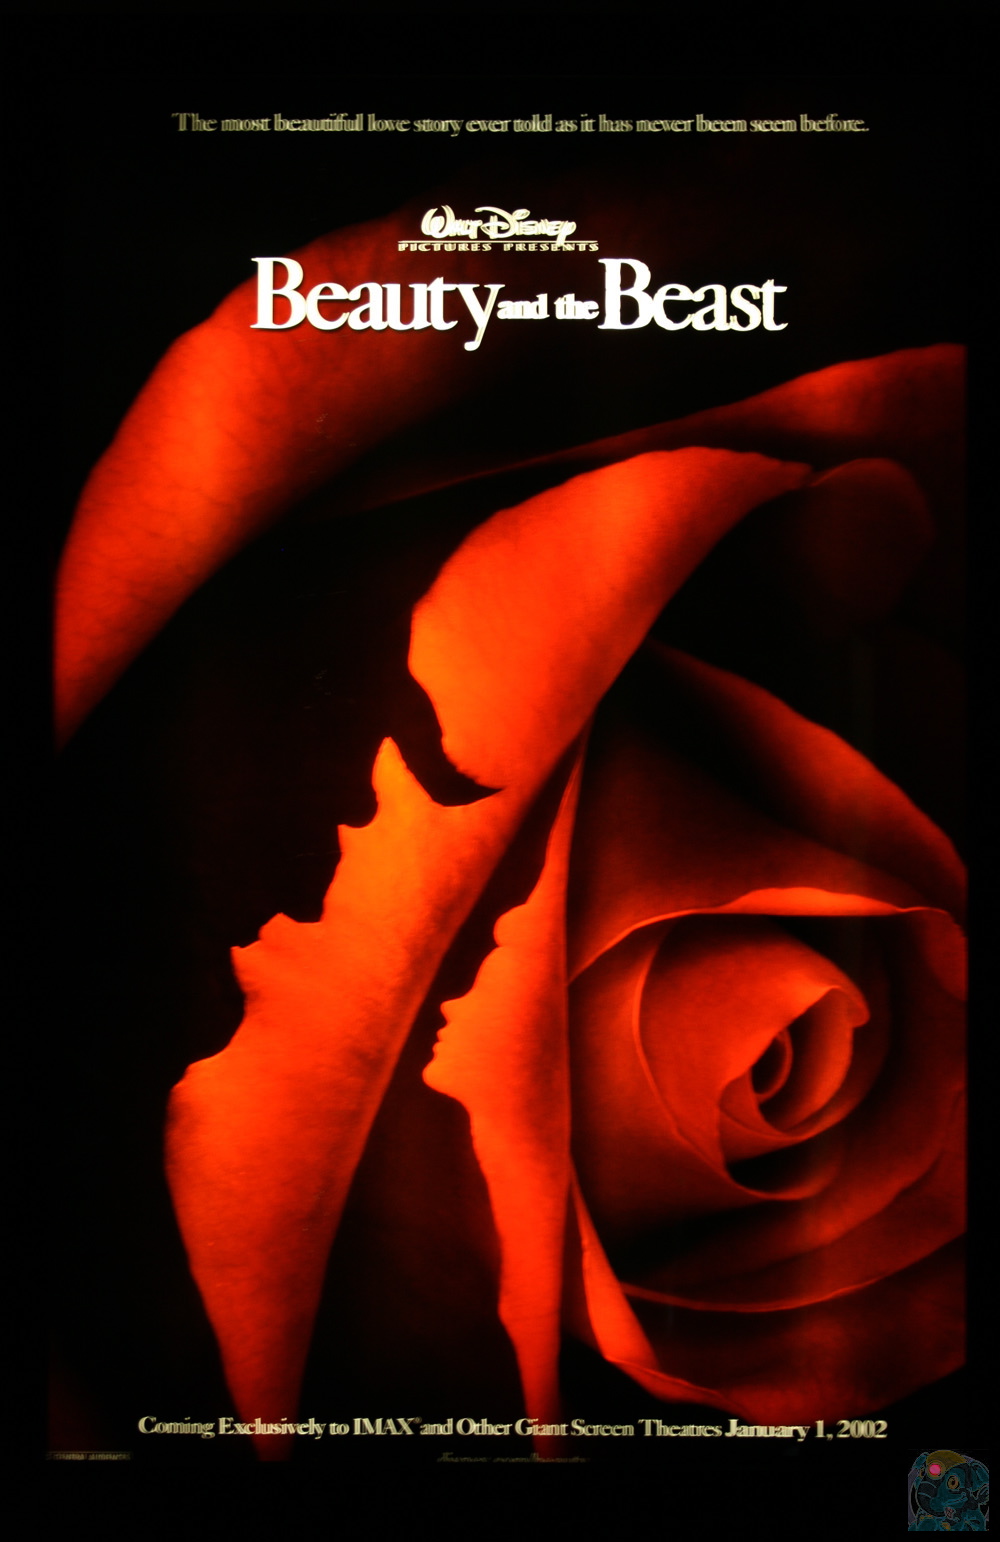 Beauty And The Beast Textless 1991 Movie Poster 24x36 Borderless Glossy  9104